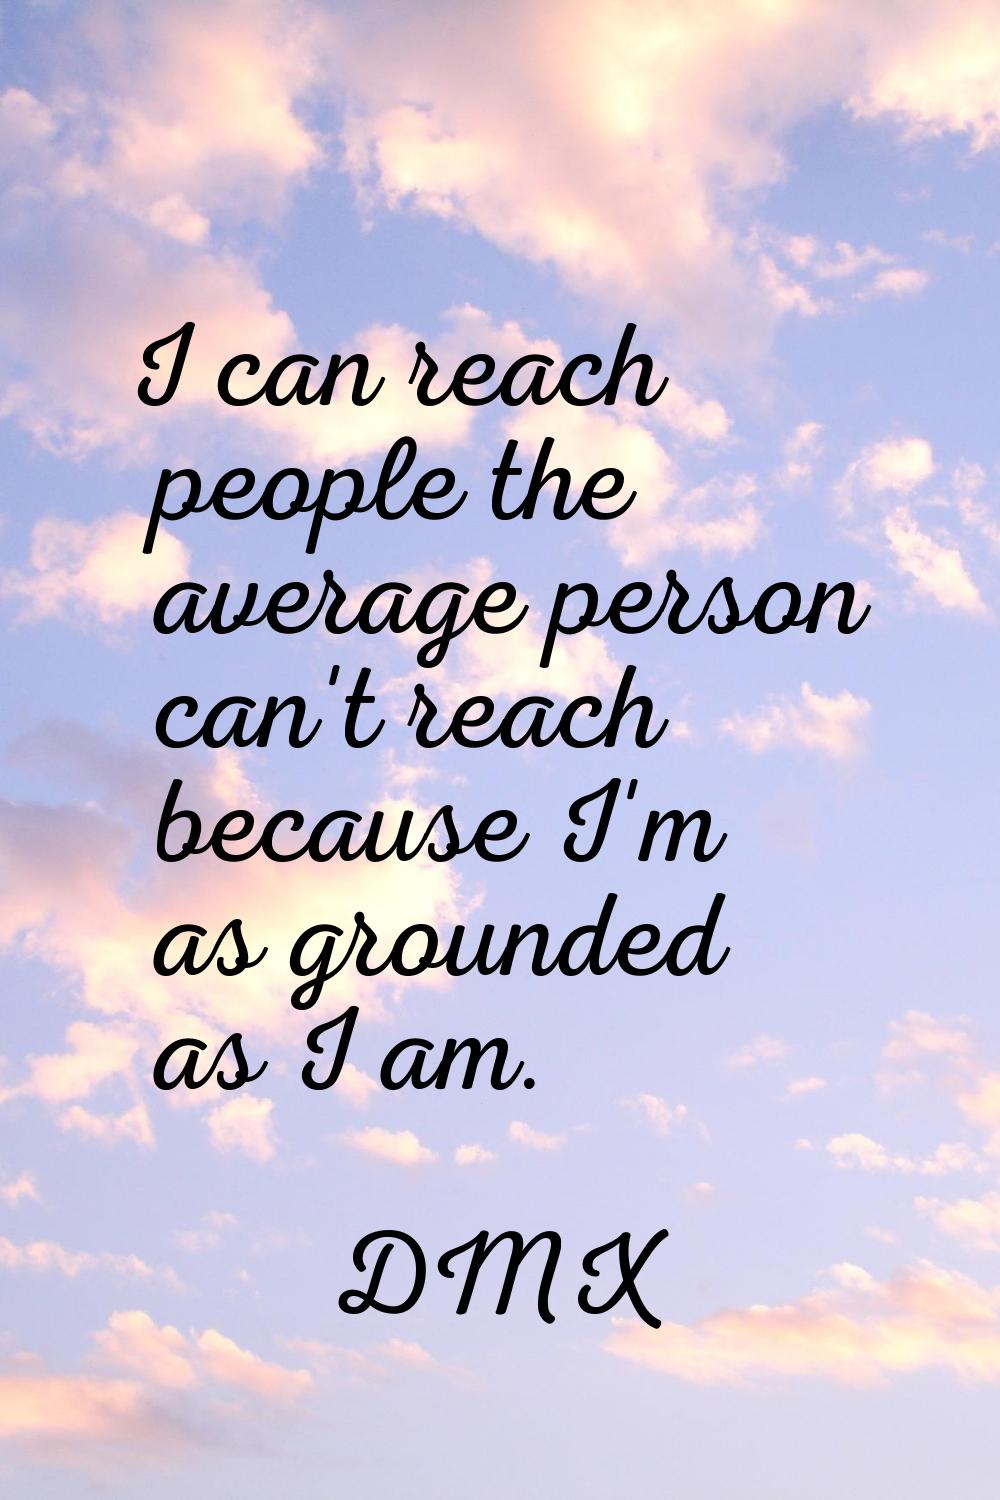 I can reach people the average person can't reach because I'm as grounded as I am.